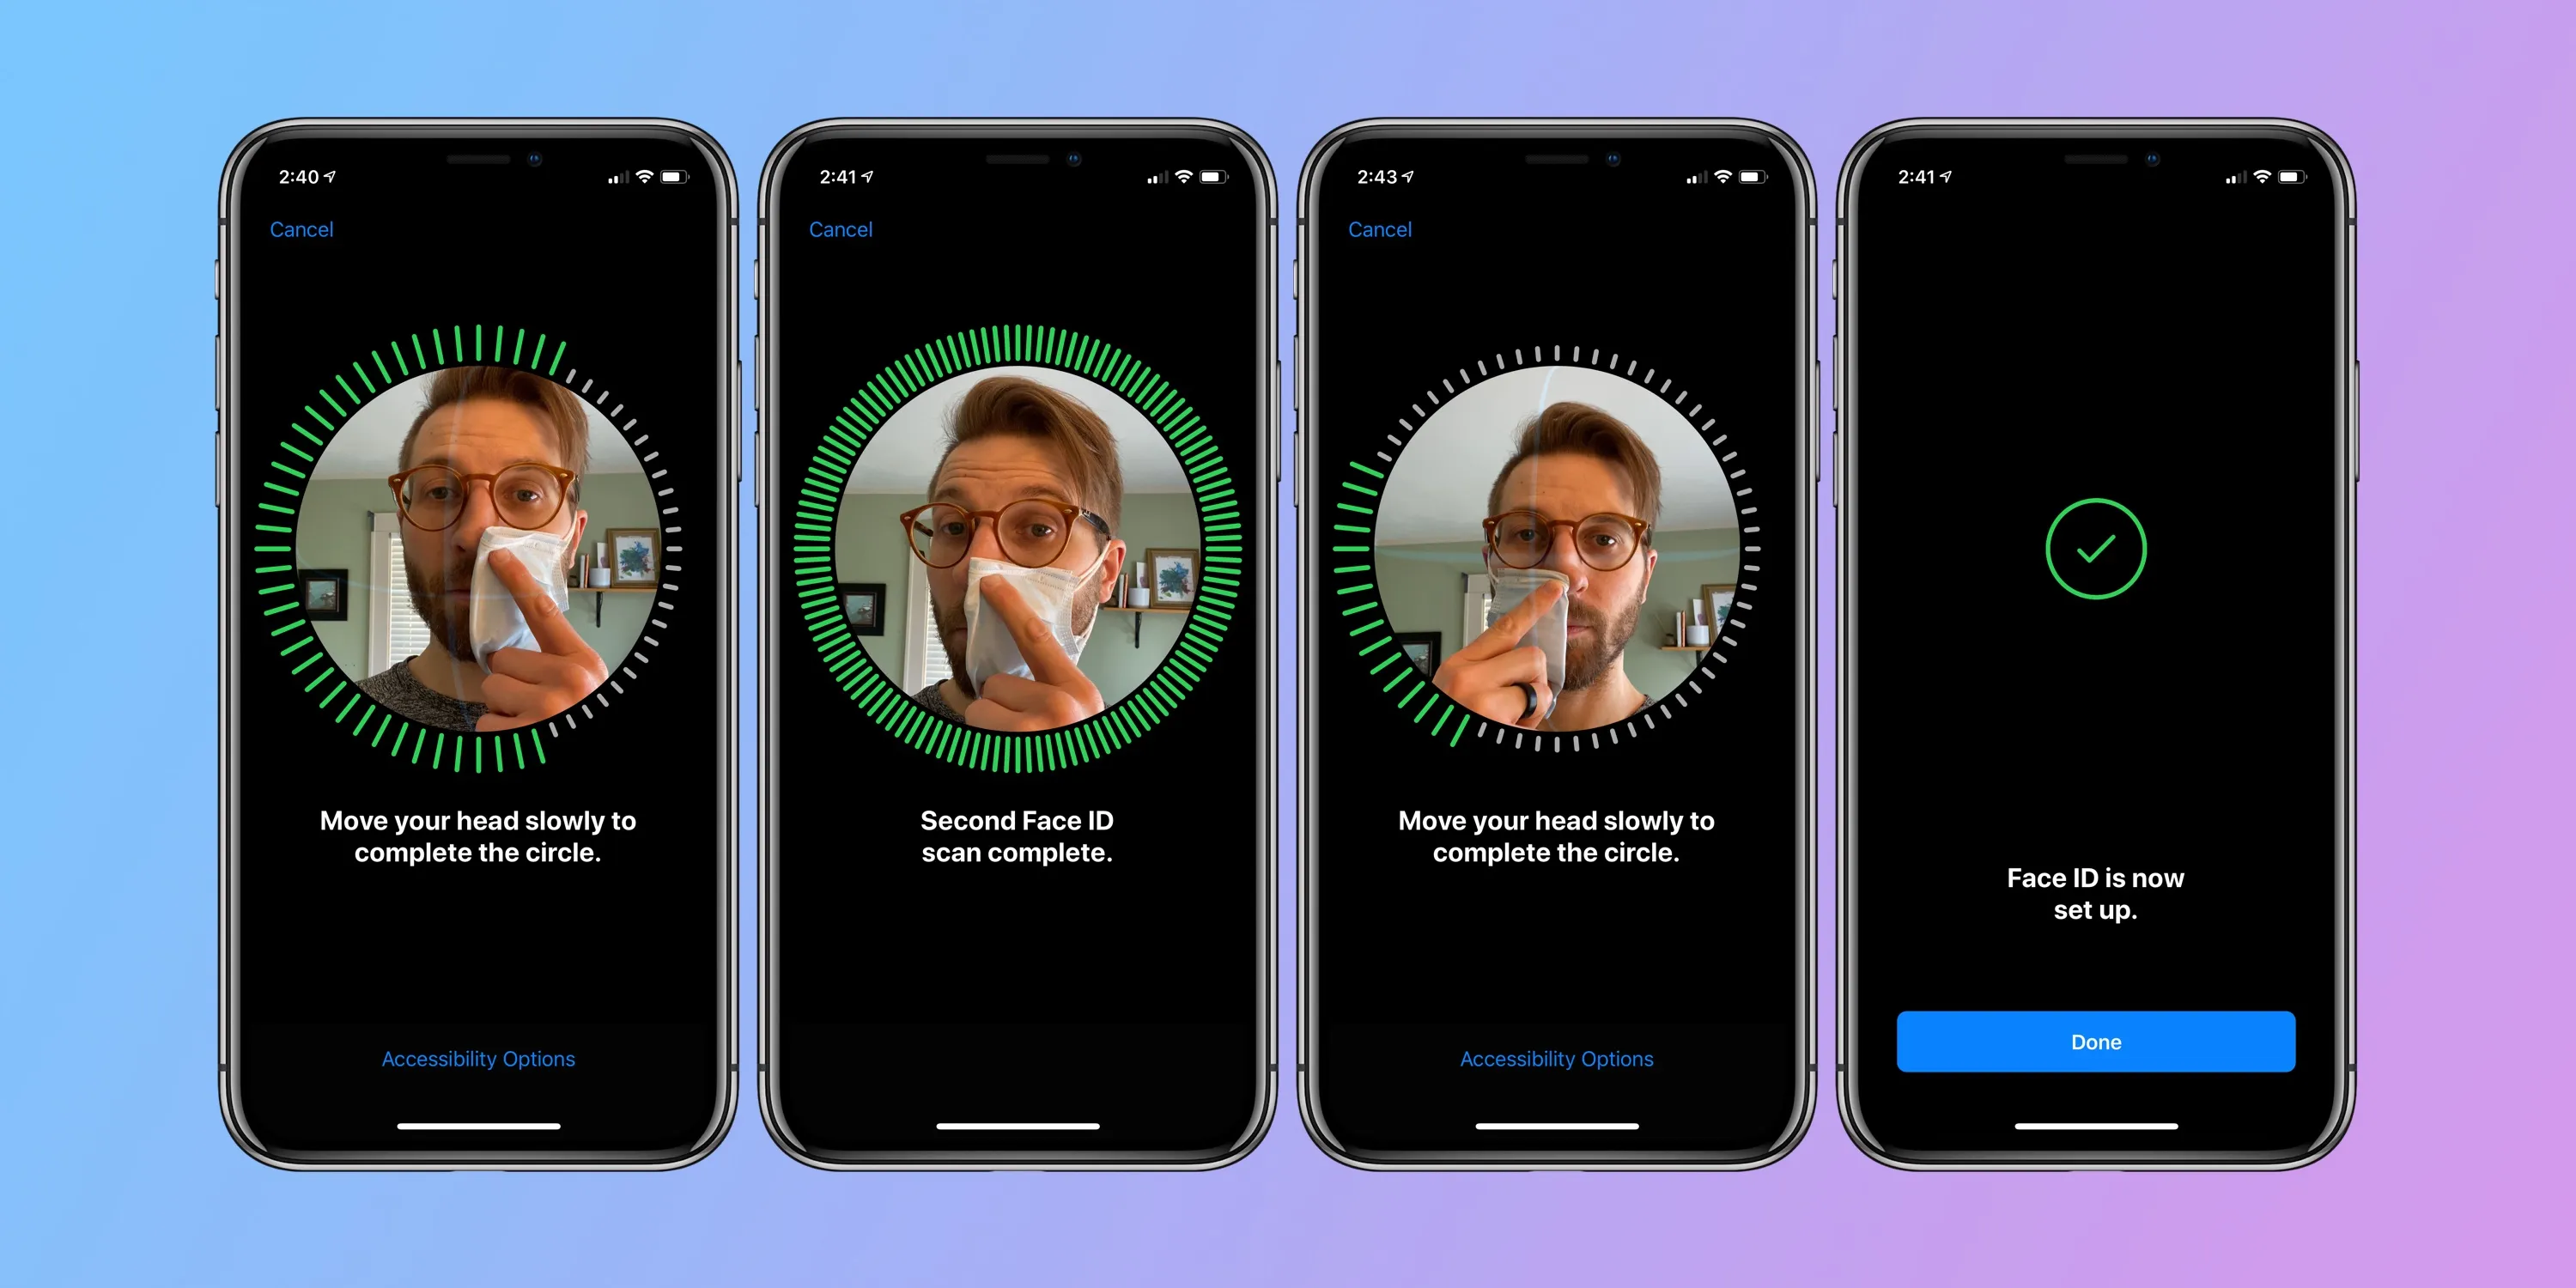 How To Set Up Face ID For Photos